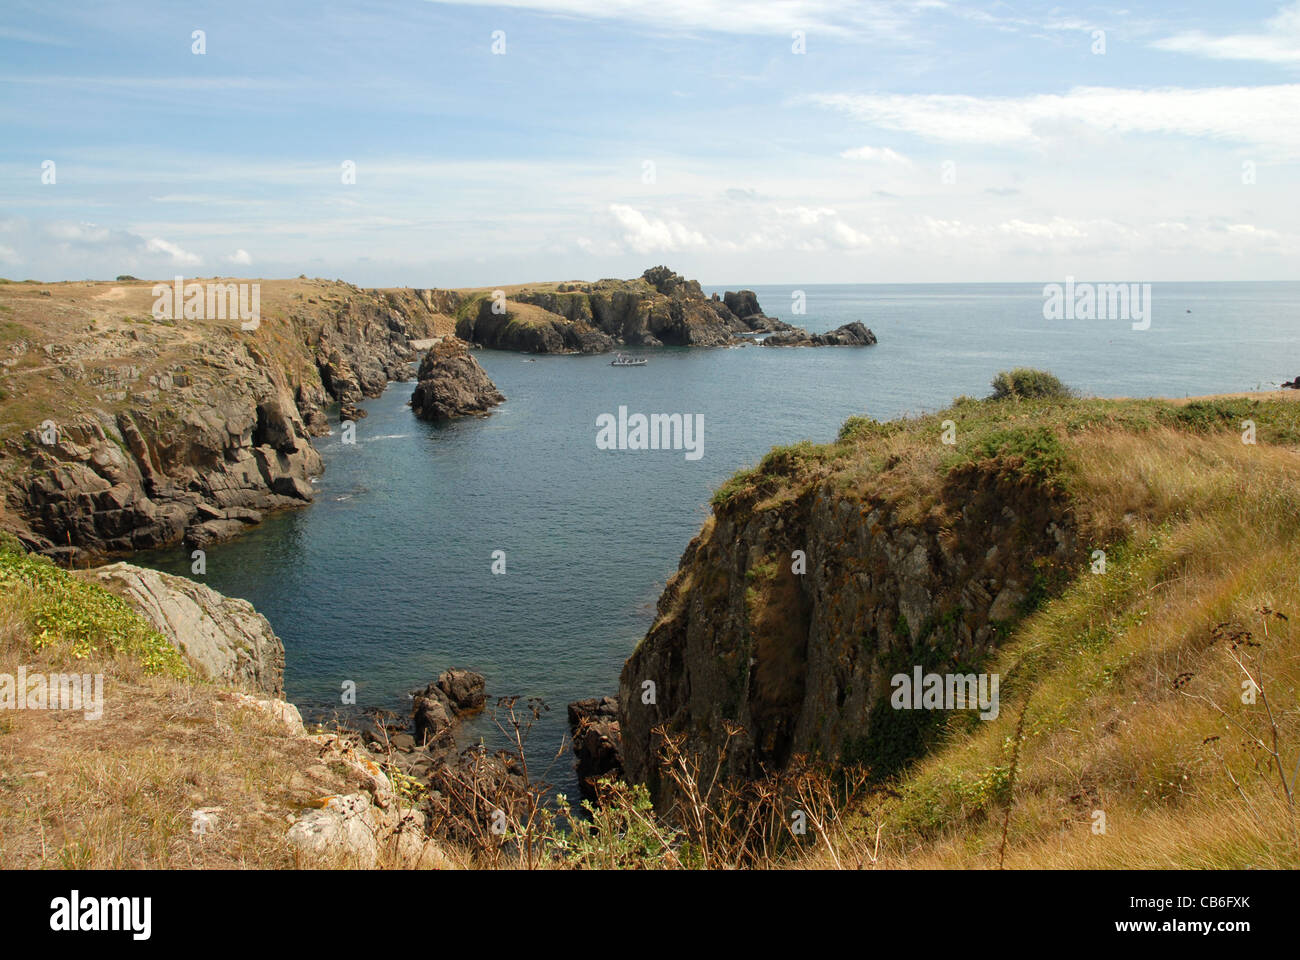 The rocky Bay of Anse du Pissot near La Meule on the zild coast Cote Sauvage of Yeu island in Vendee, France Stock Photo